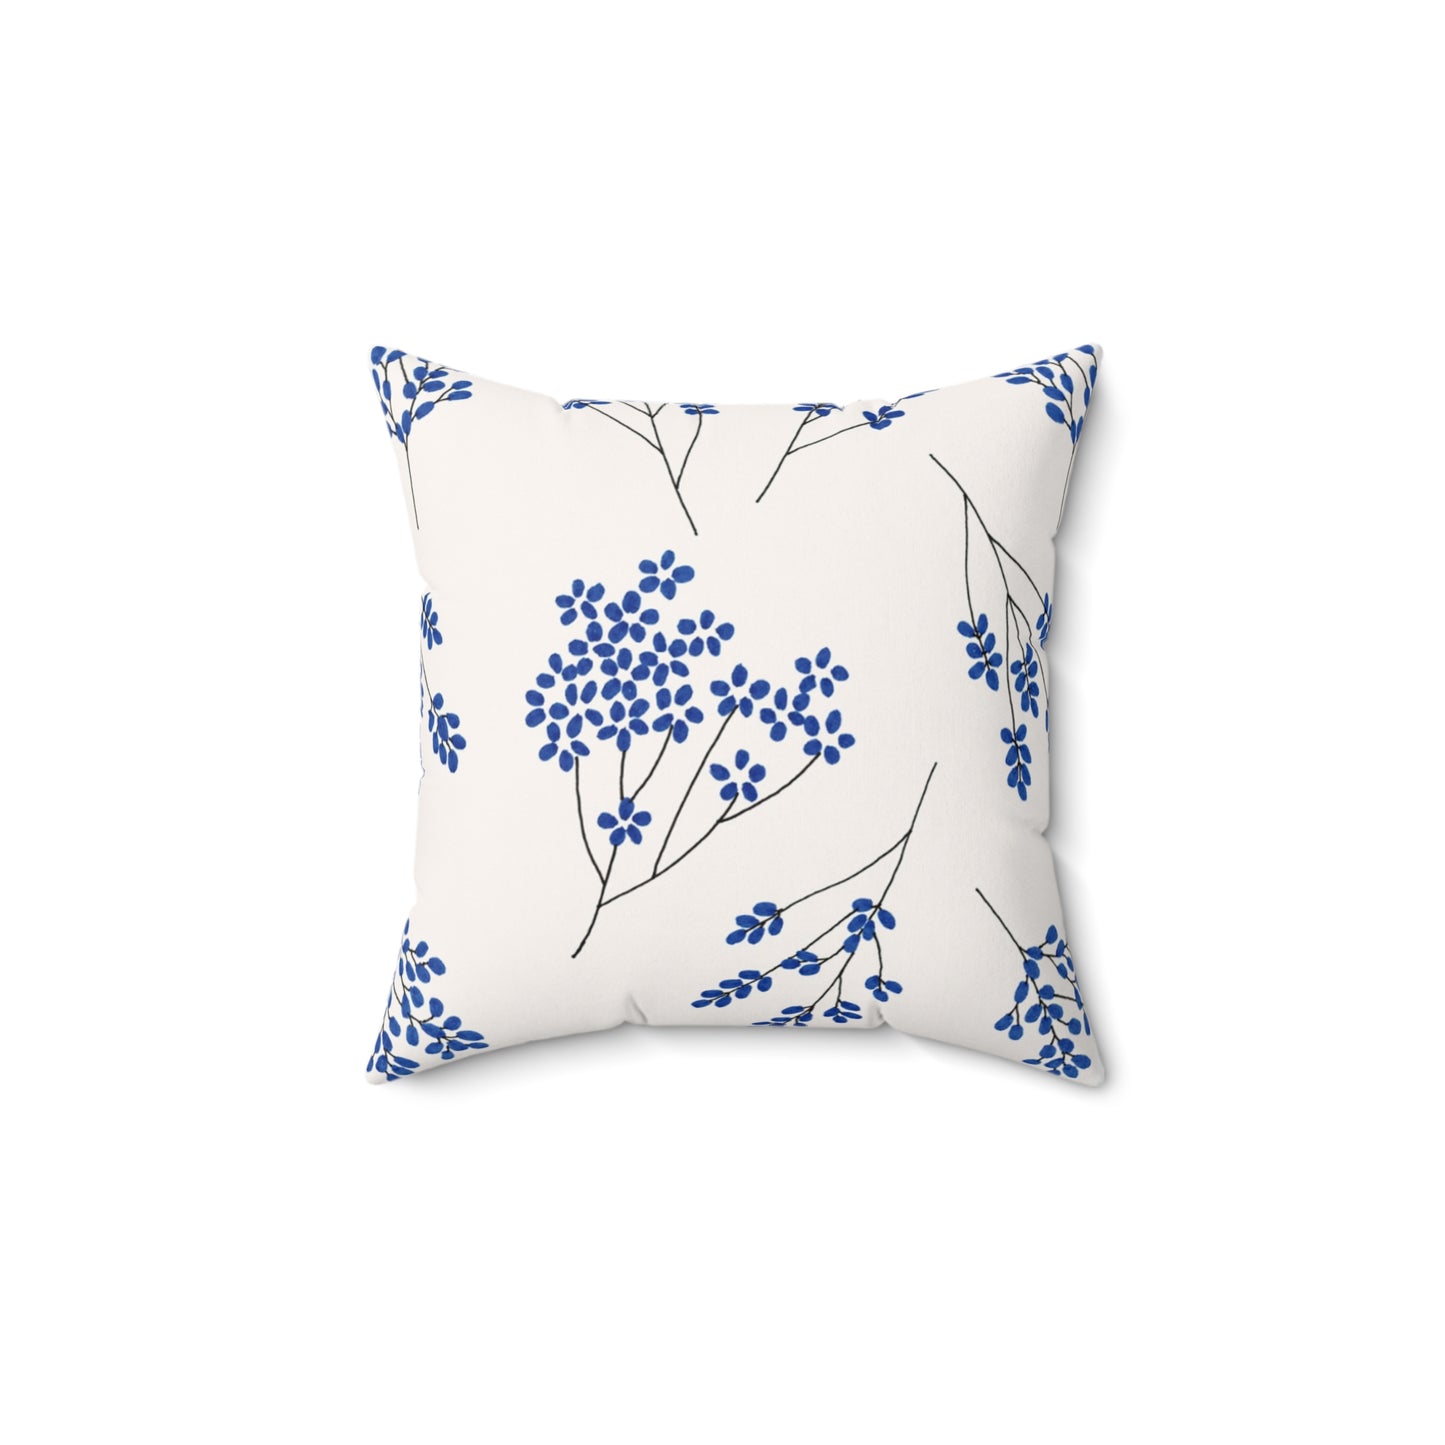 "DAINTY" Square Pillow